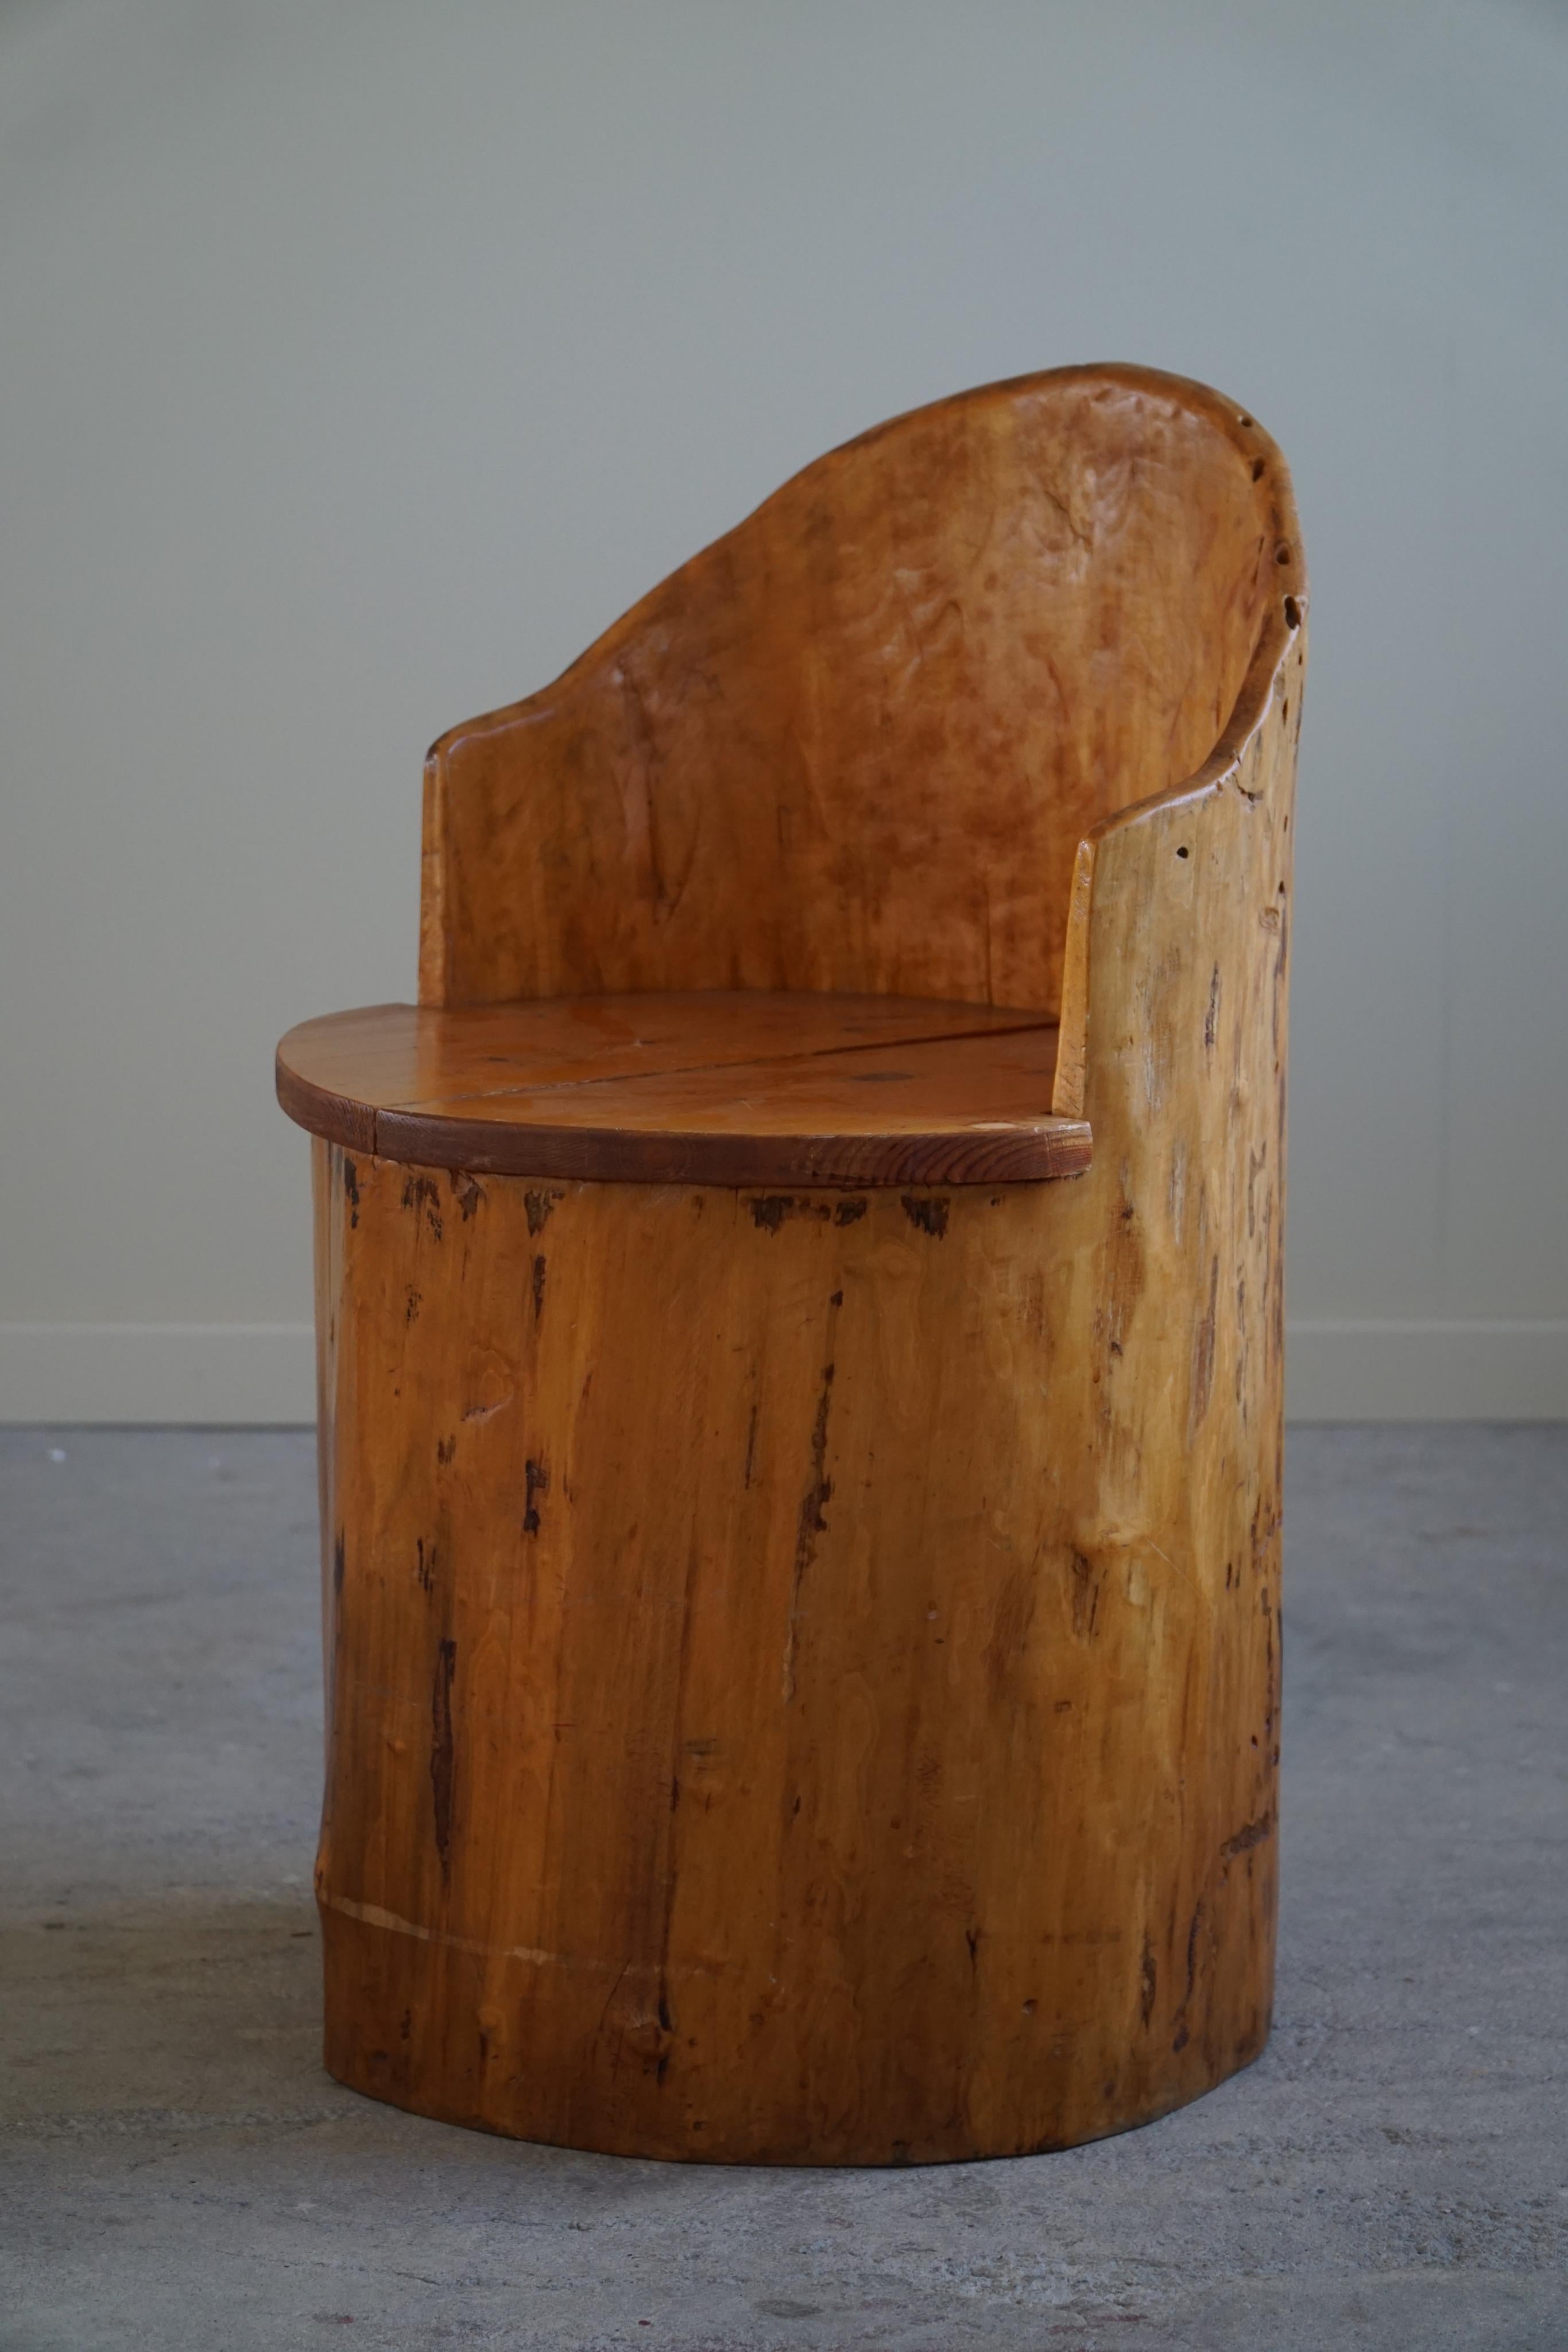 Hand-Carved Primitive Stump Chair in Pine, Hand Carved, Swedish Modern, Wabi Sabi, 1960s For Sale